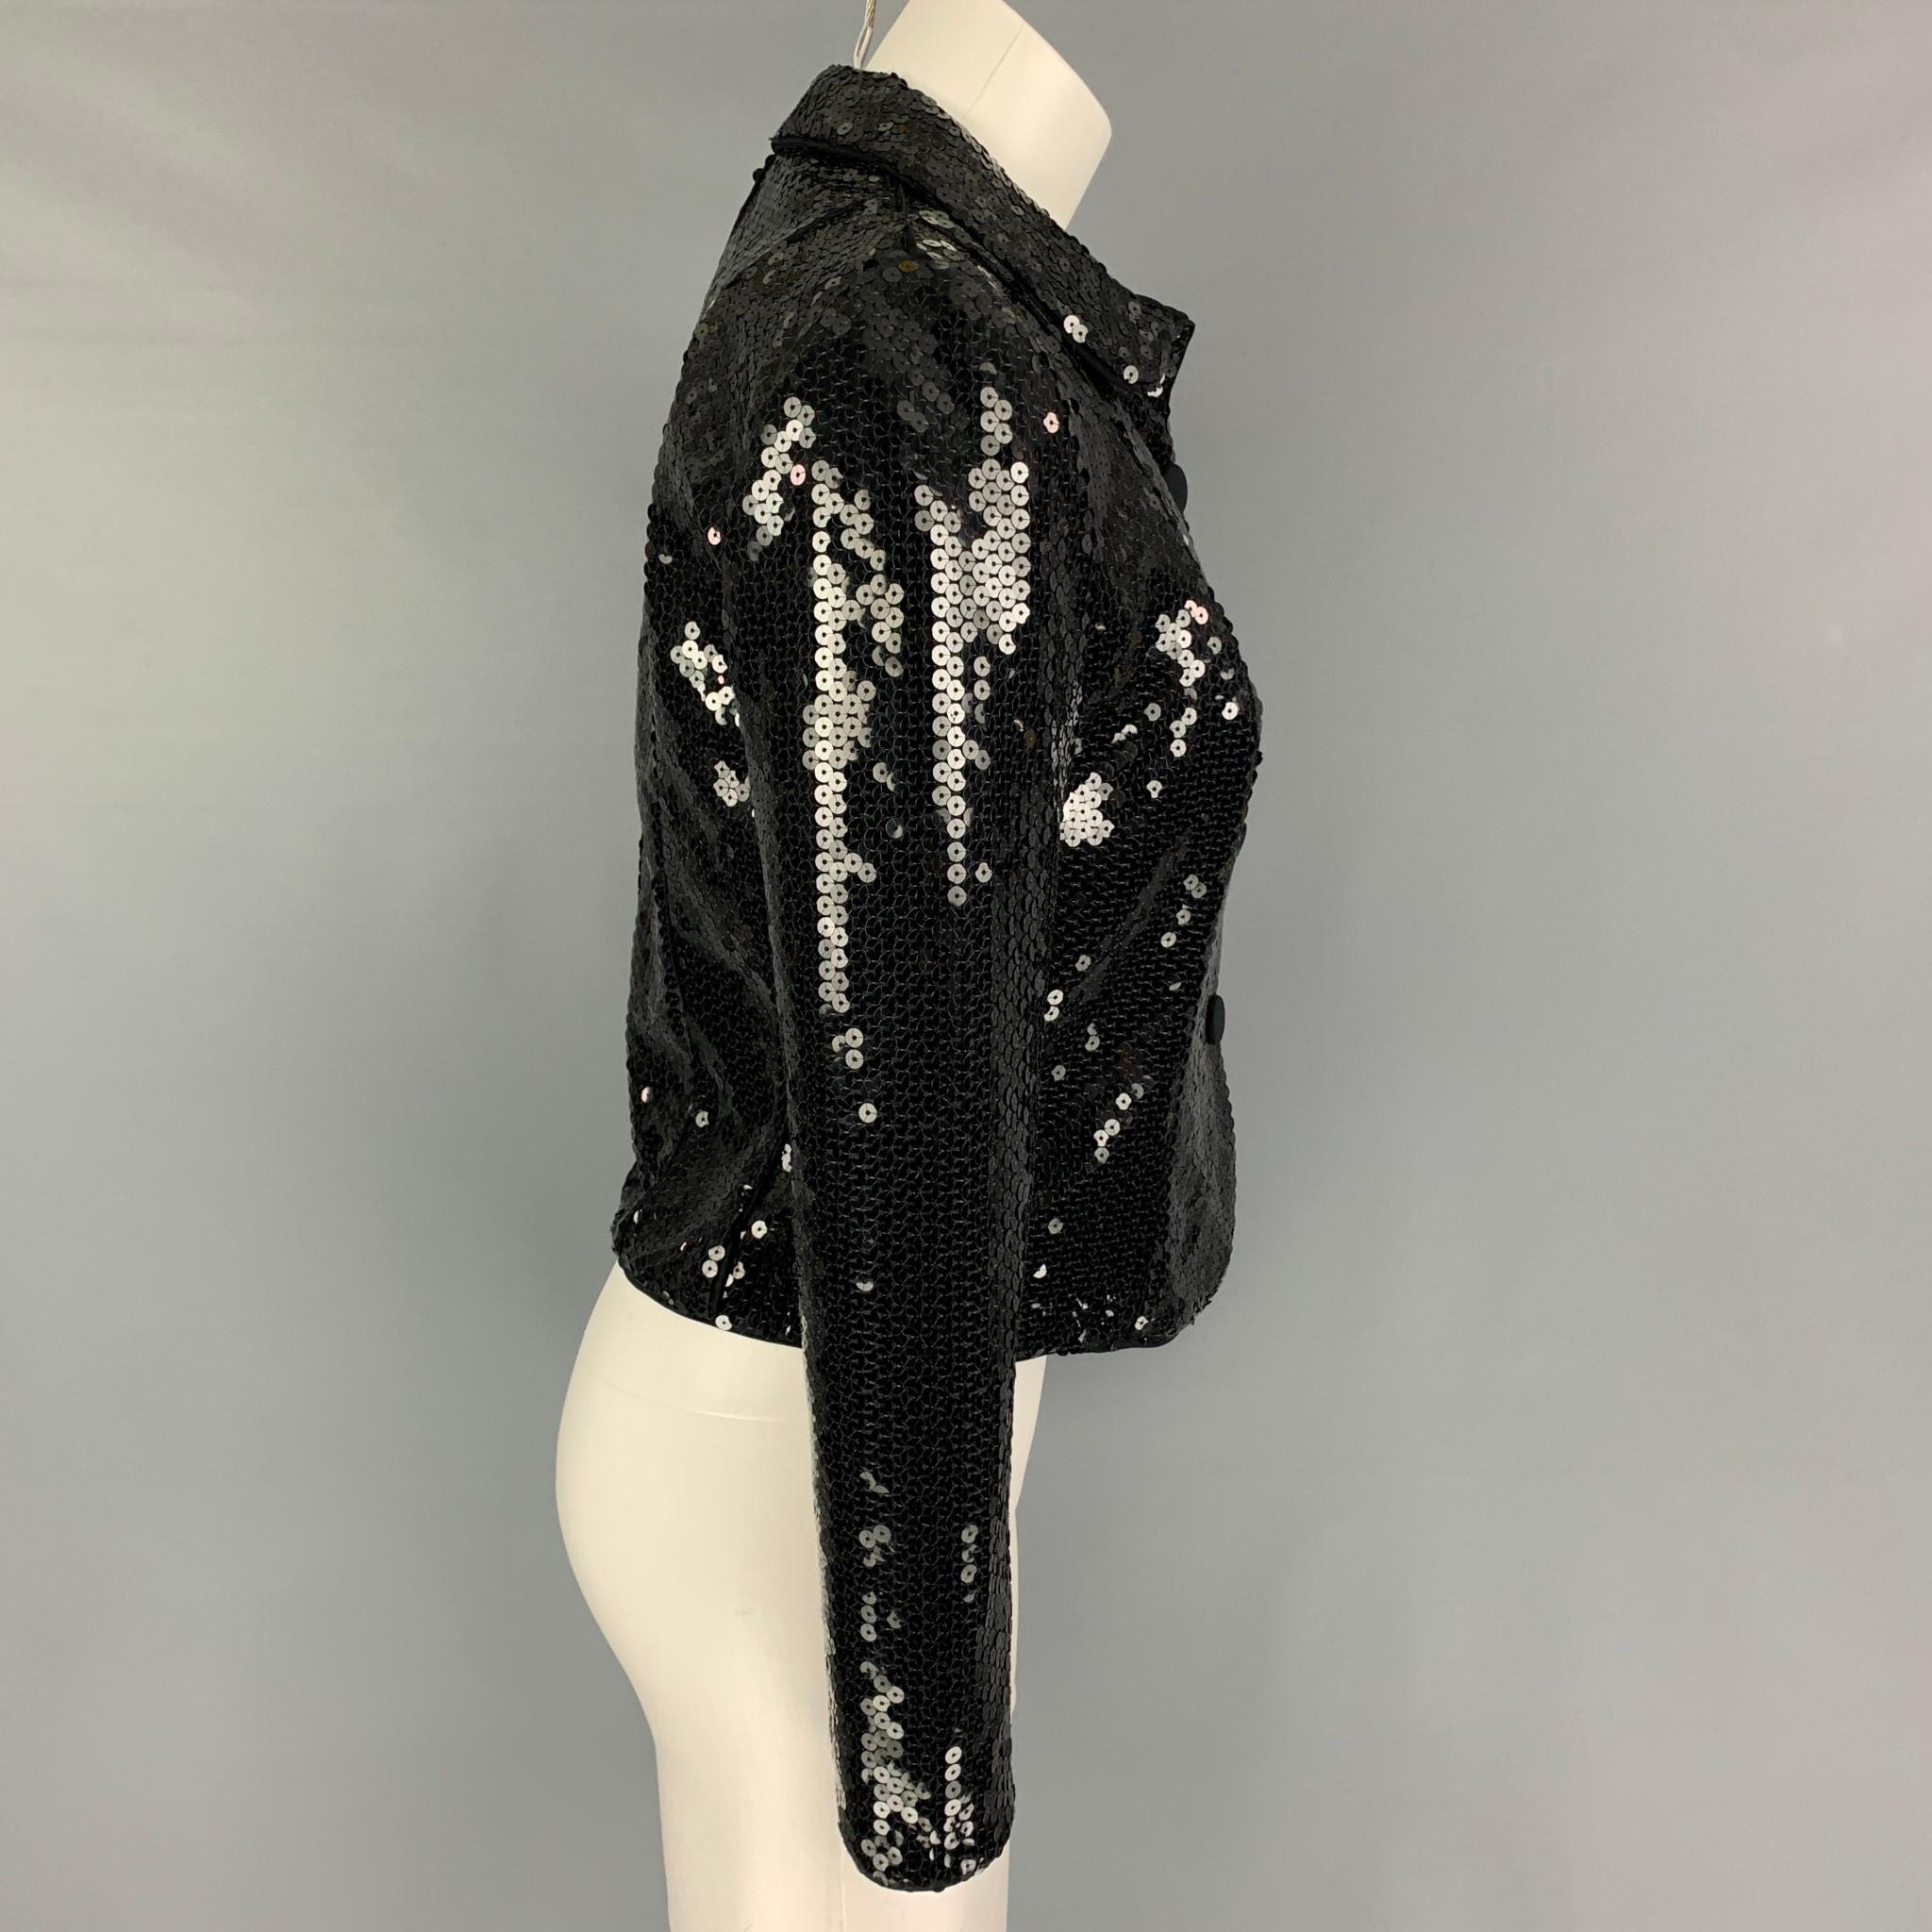 GIORGIO ARMANI jacket comes in a black sequined material featuring a spread collar and a snap button closure. Made in Italy. 

Very Good Pre-Owned Condition. Fabric tag removed.
Marked: Size tag removed.

Measurements:

Shoulder: 15.5 in.
Bust: 34